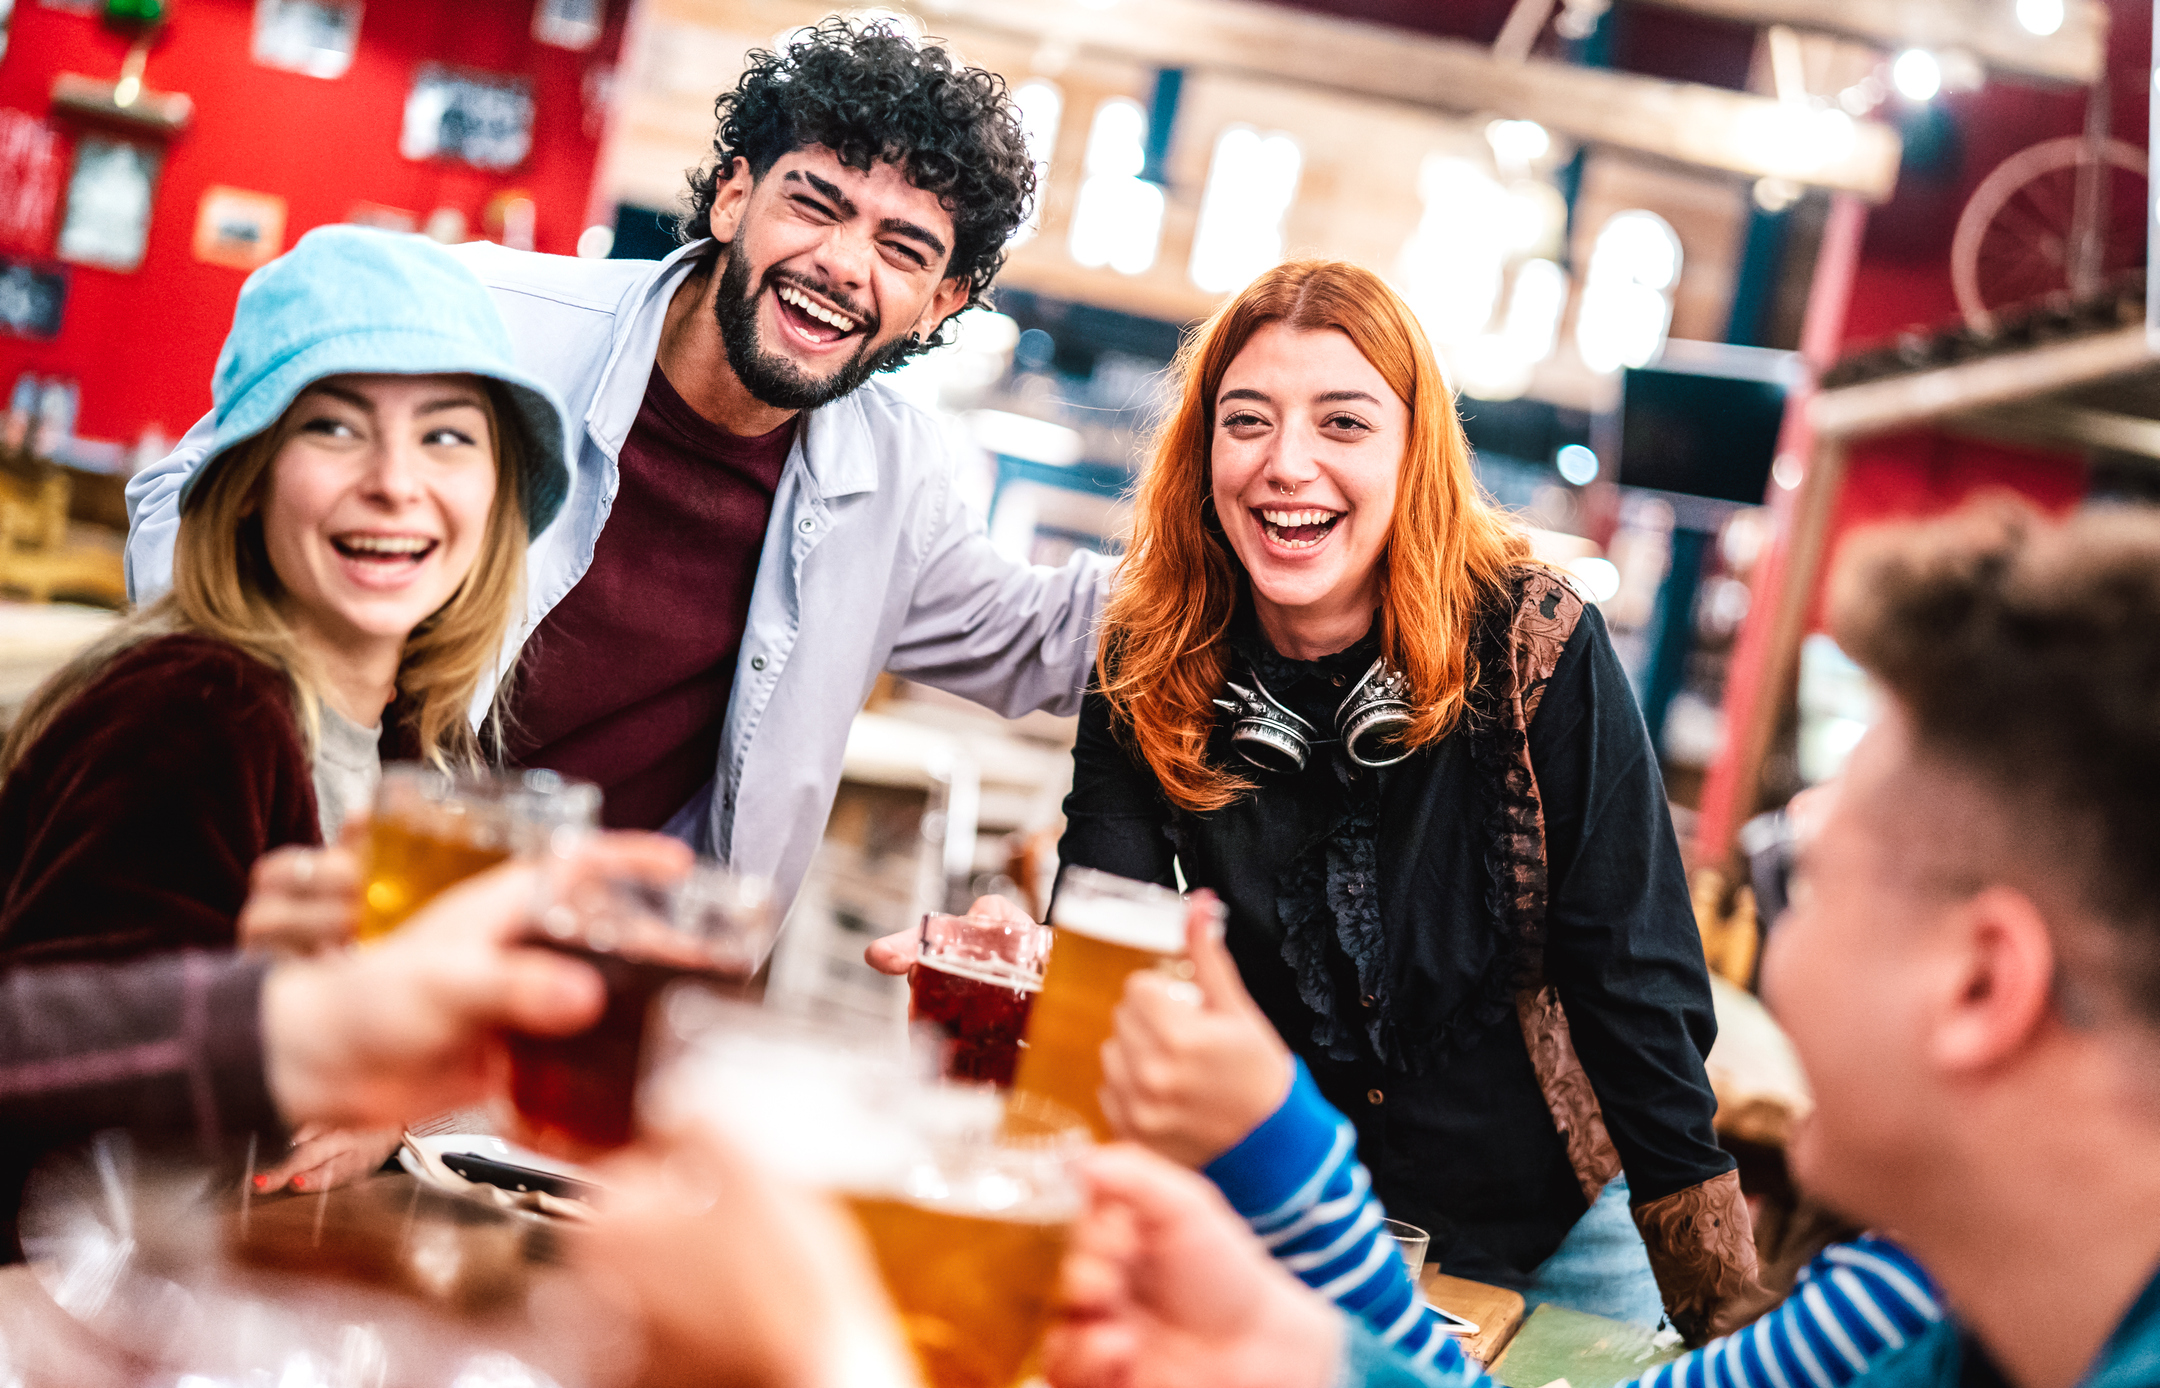 Young adults having fun at a brewery with glasses of beer in their hands